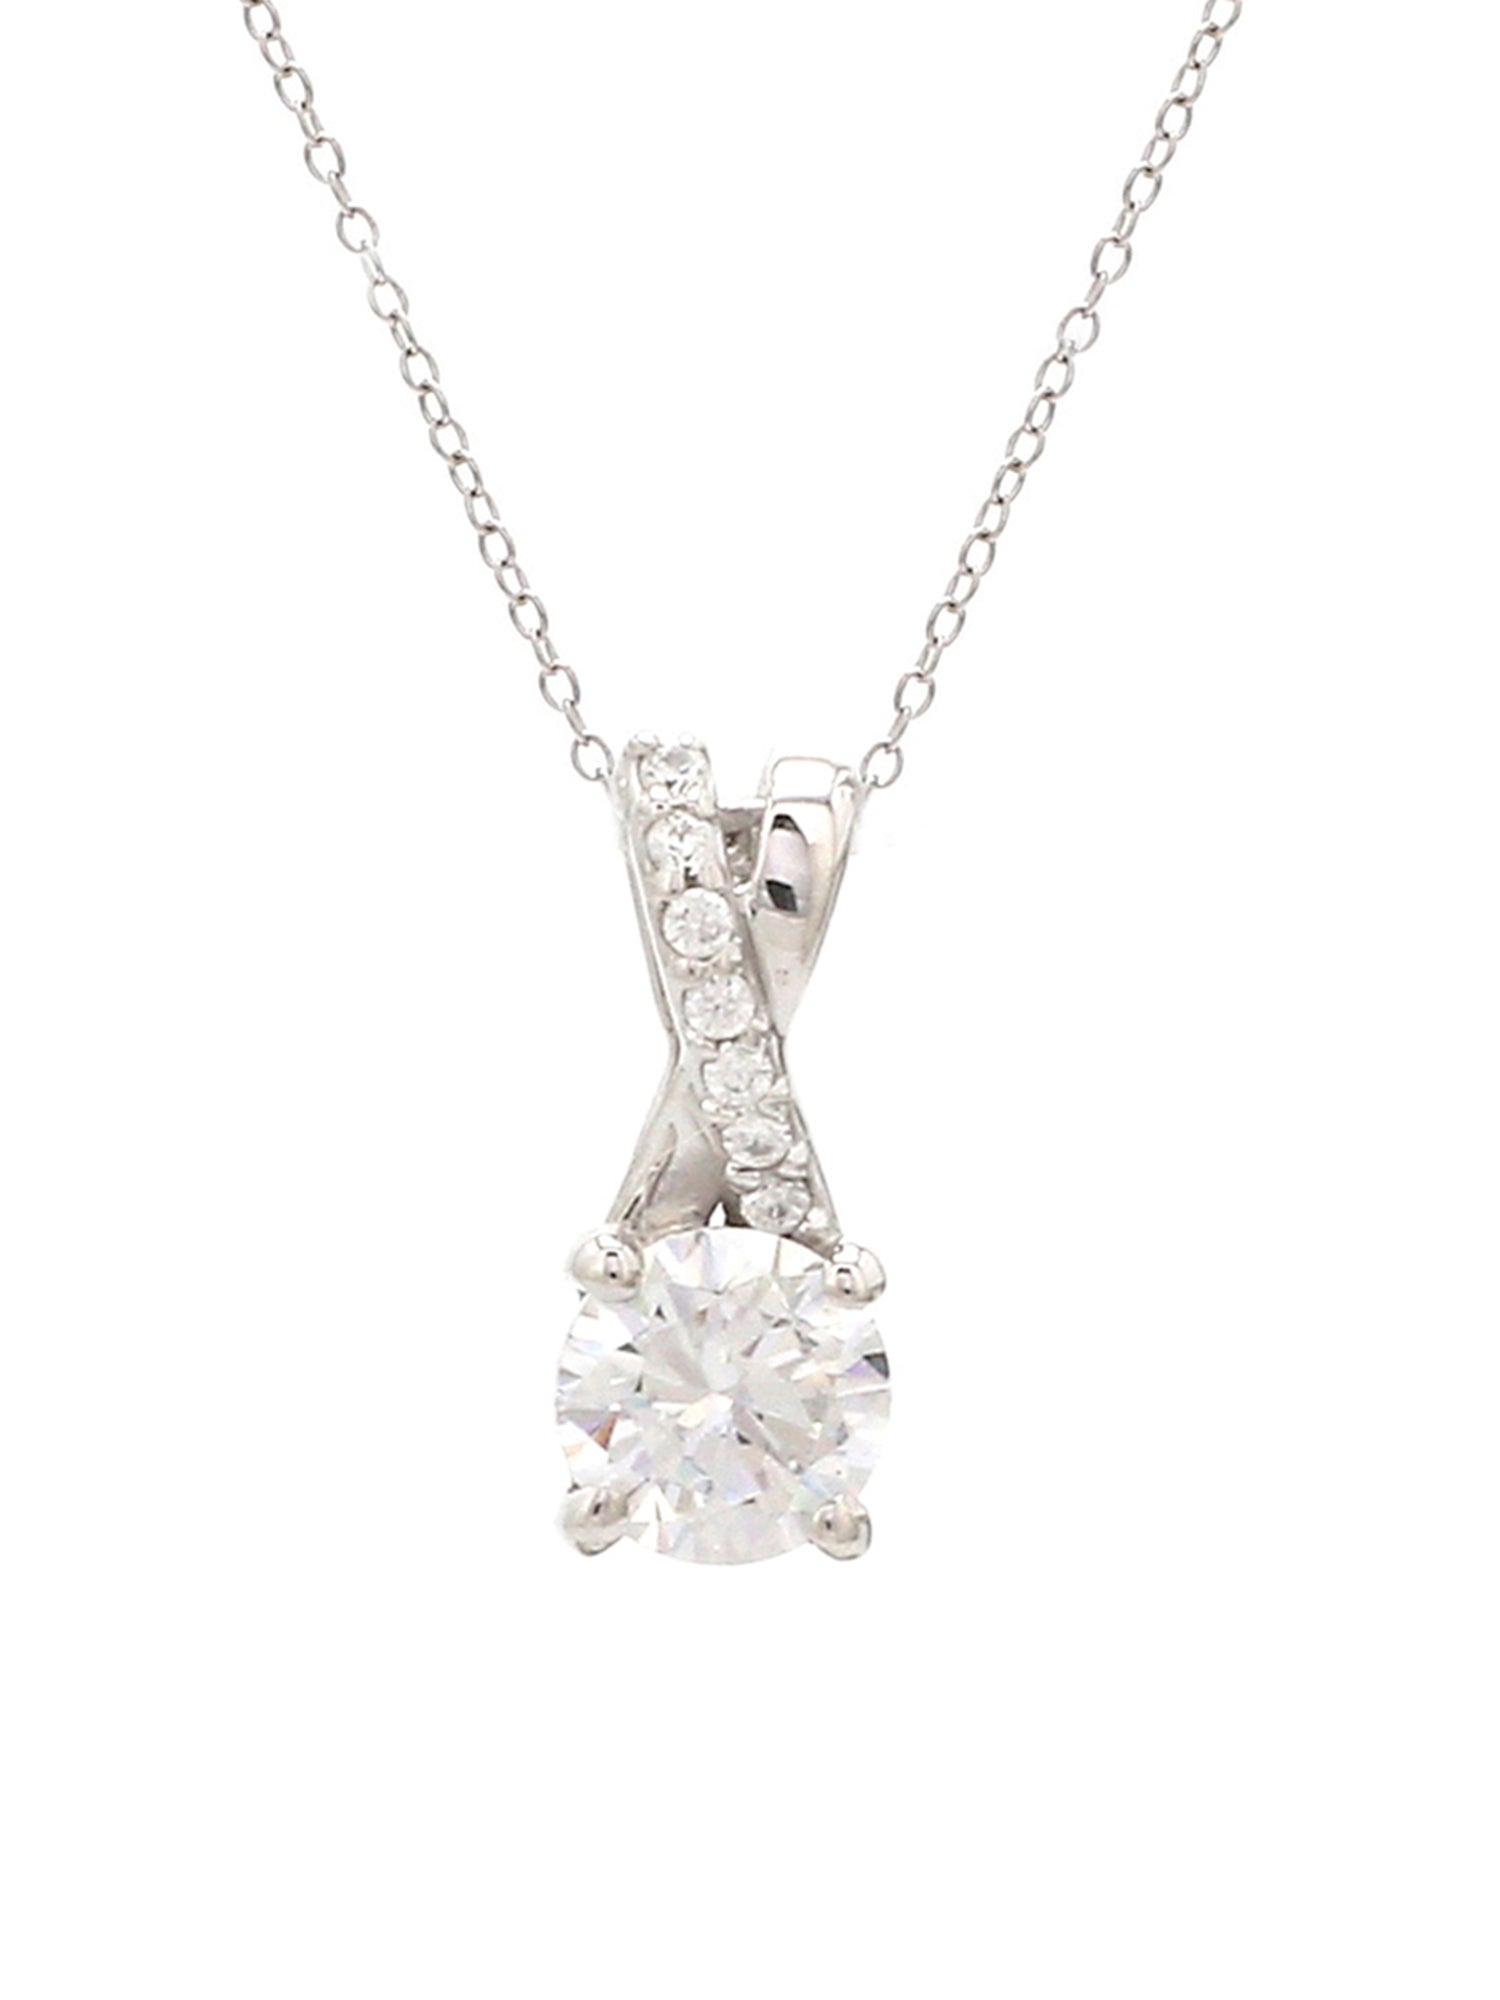 0.75 CARAT AMERICAN DIAMOND SOLITAIRE PENDANT WITH PURE SILVER CHAIN FOR WOMEN